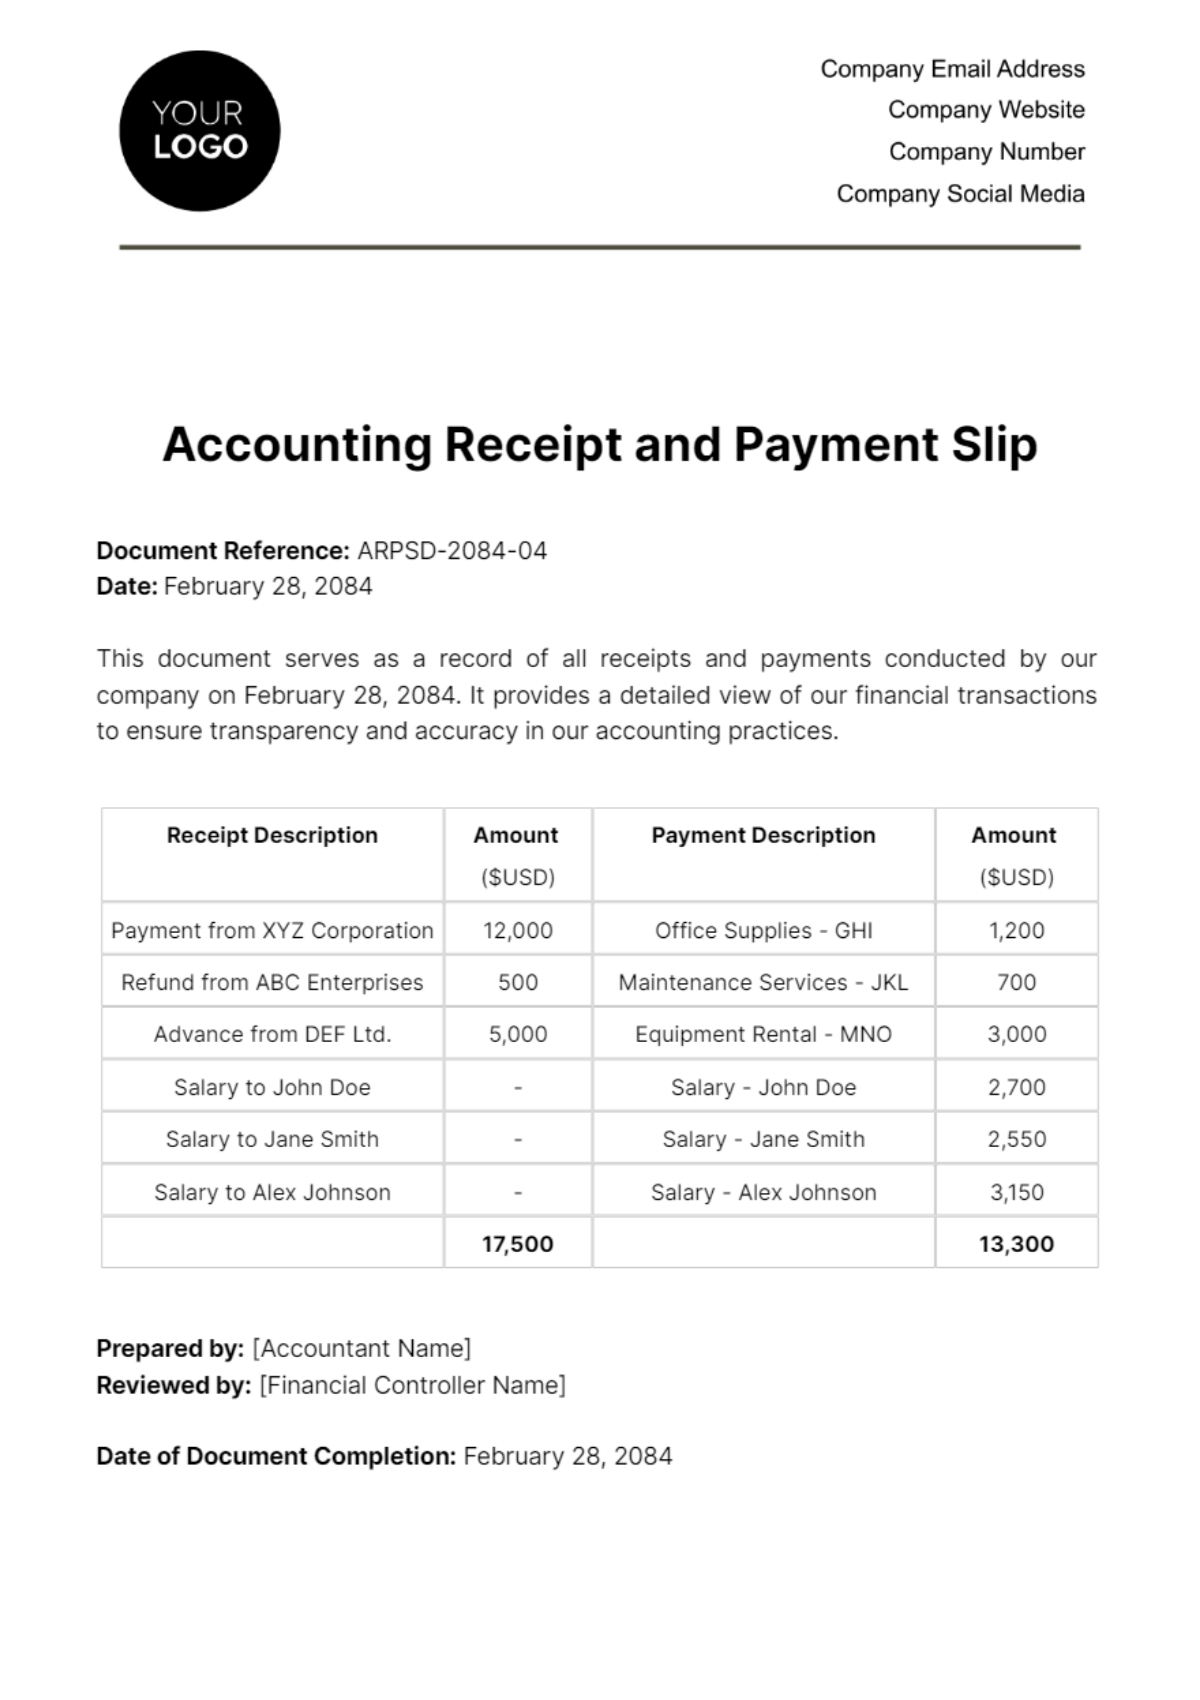 Accounting Receipt and Payment Slip Template